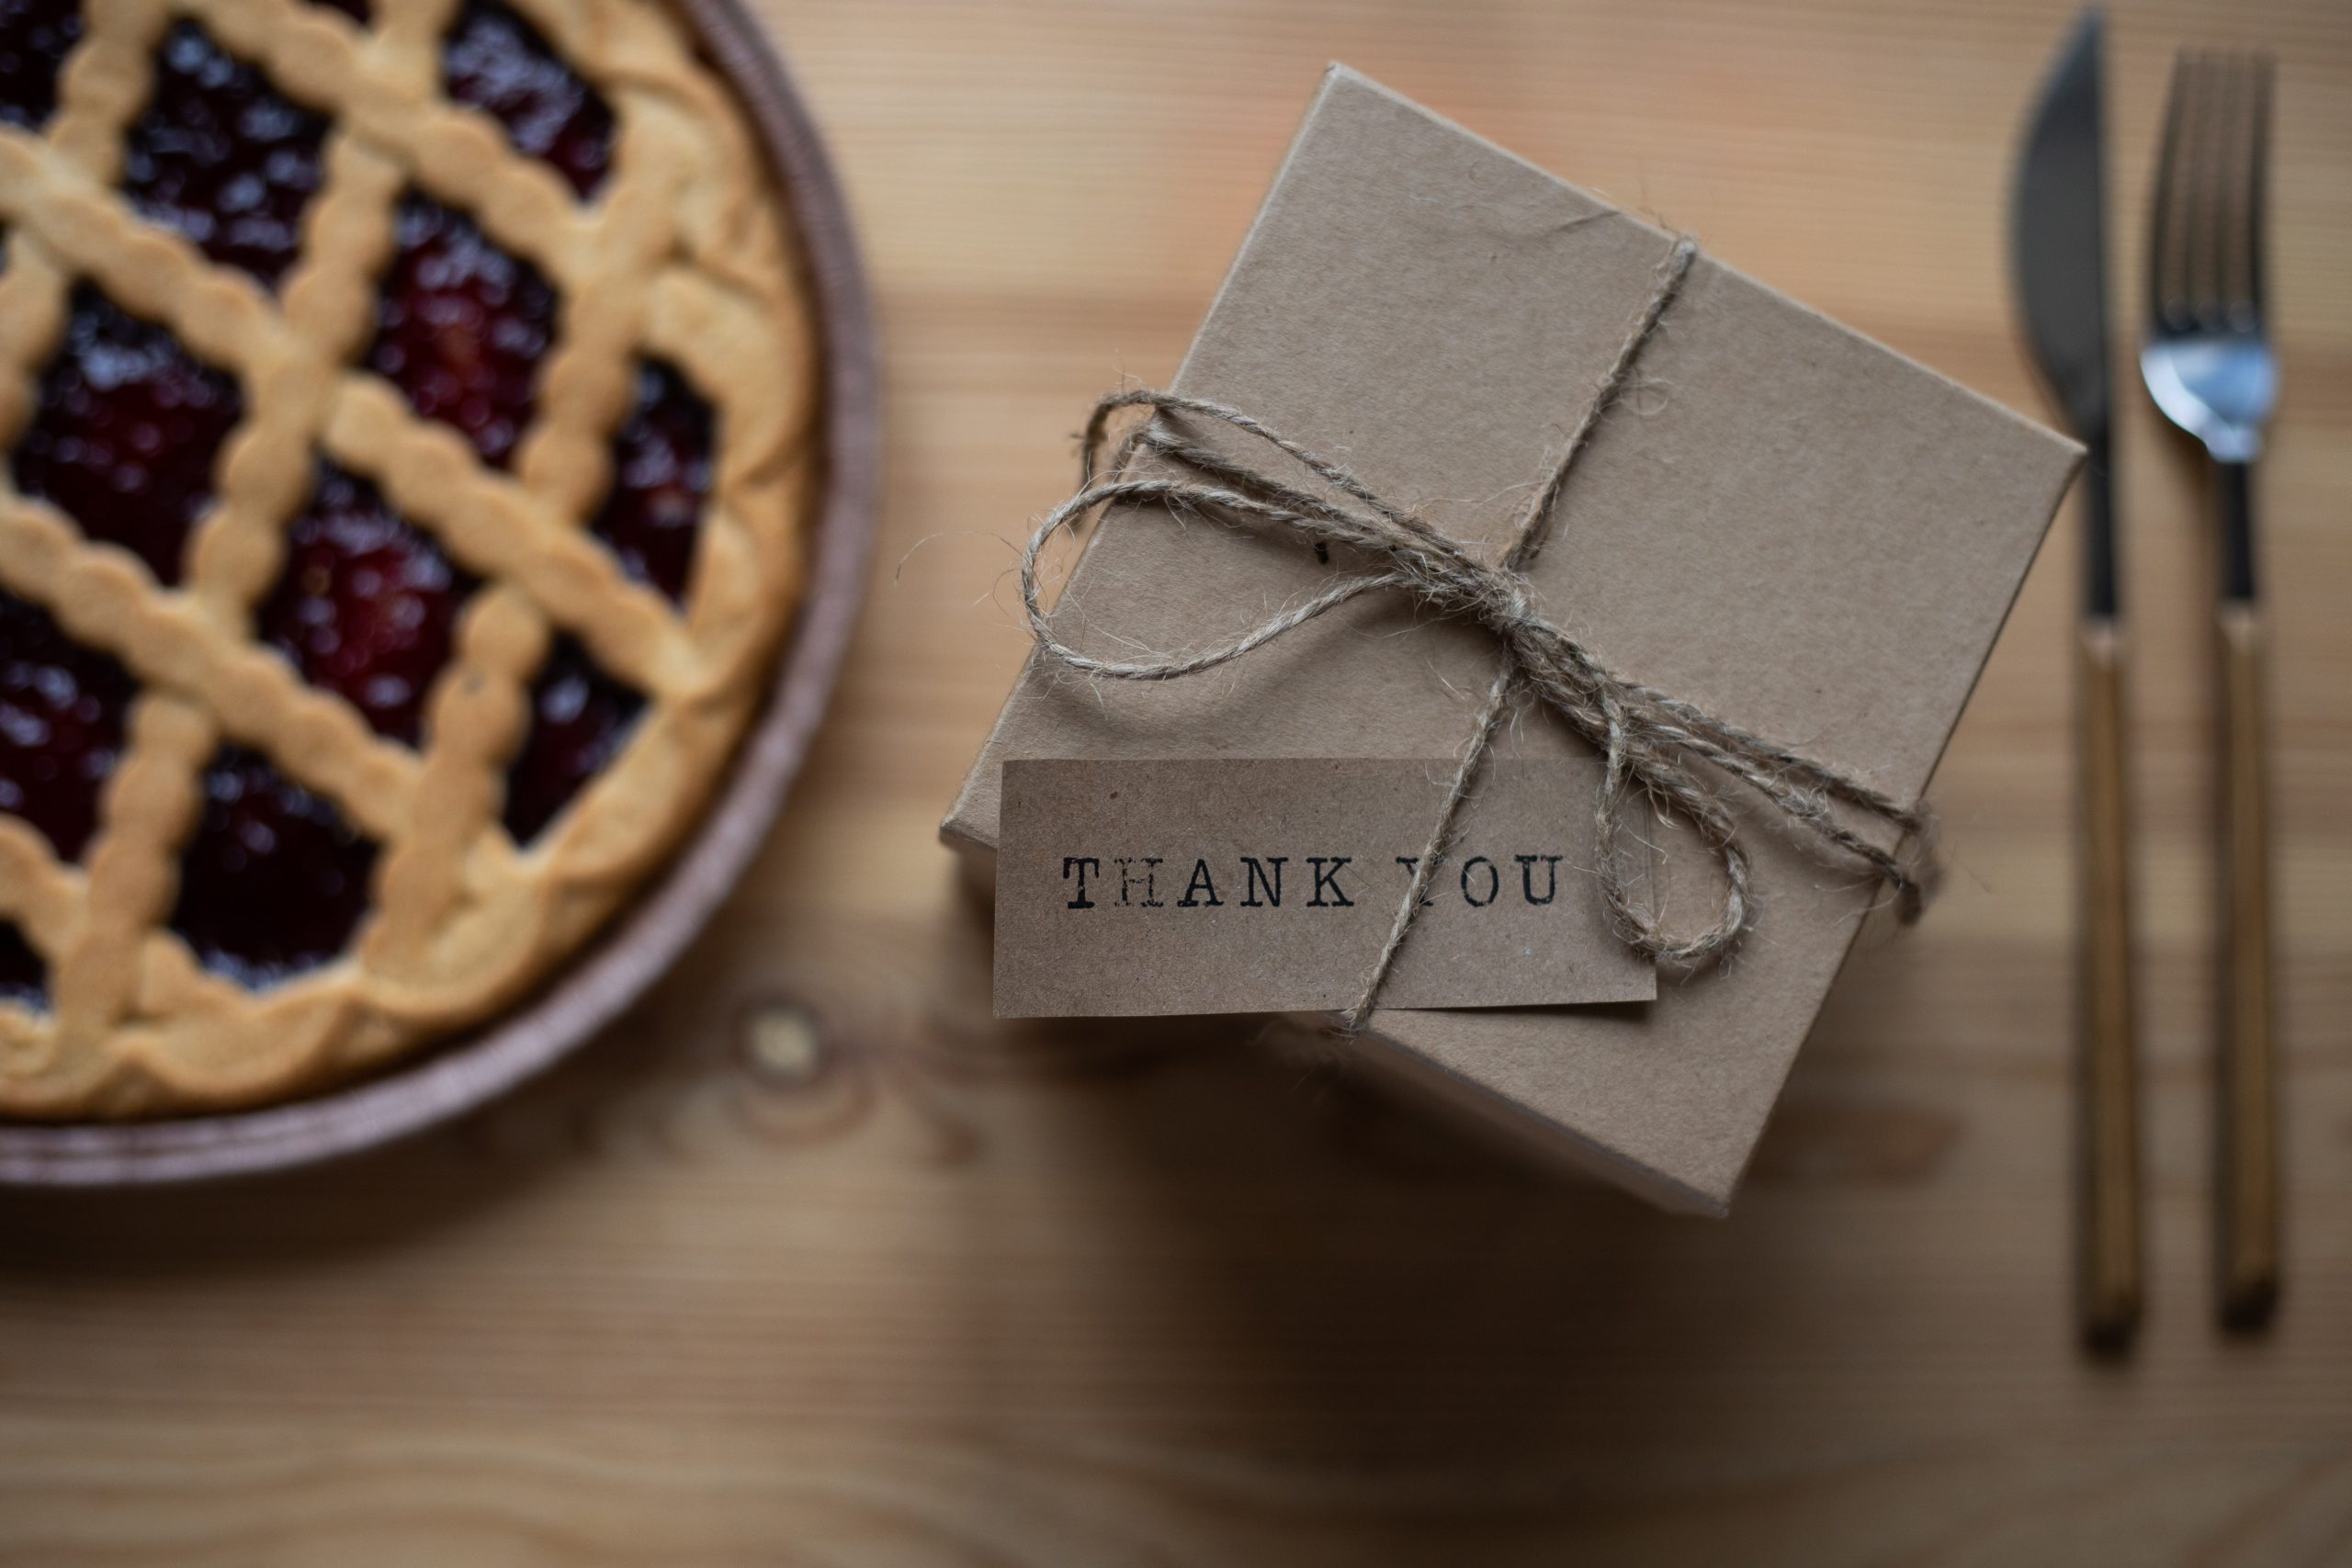 A small box wrapped in plain paper with a  tag that says 'thank you'.